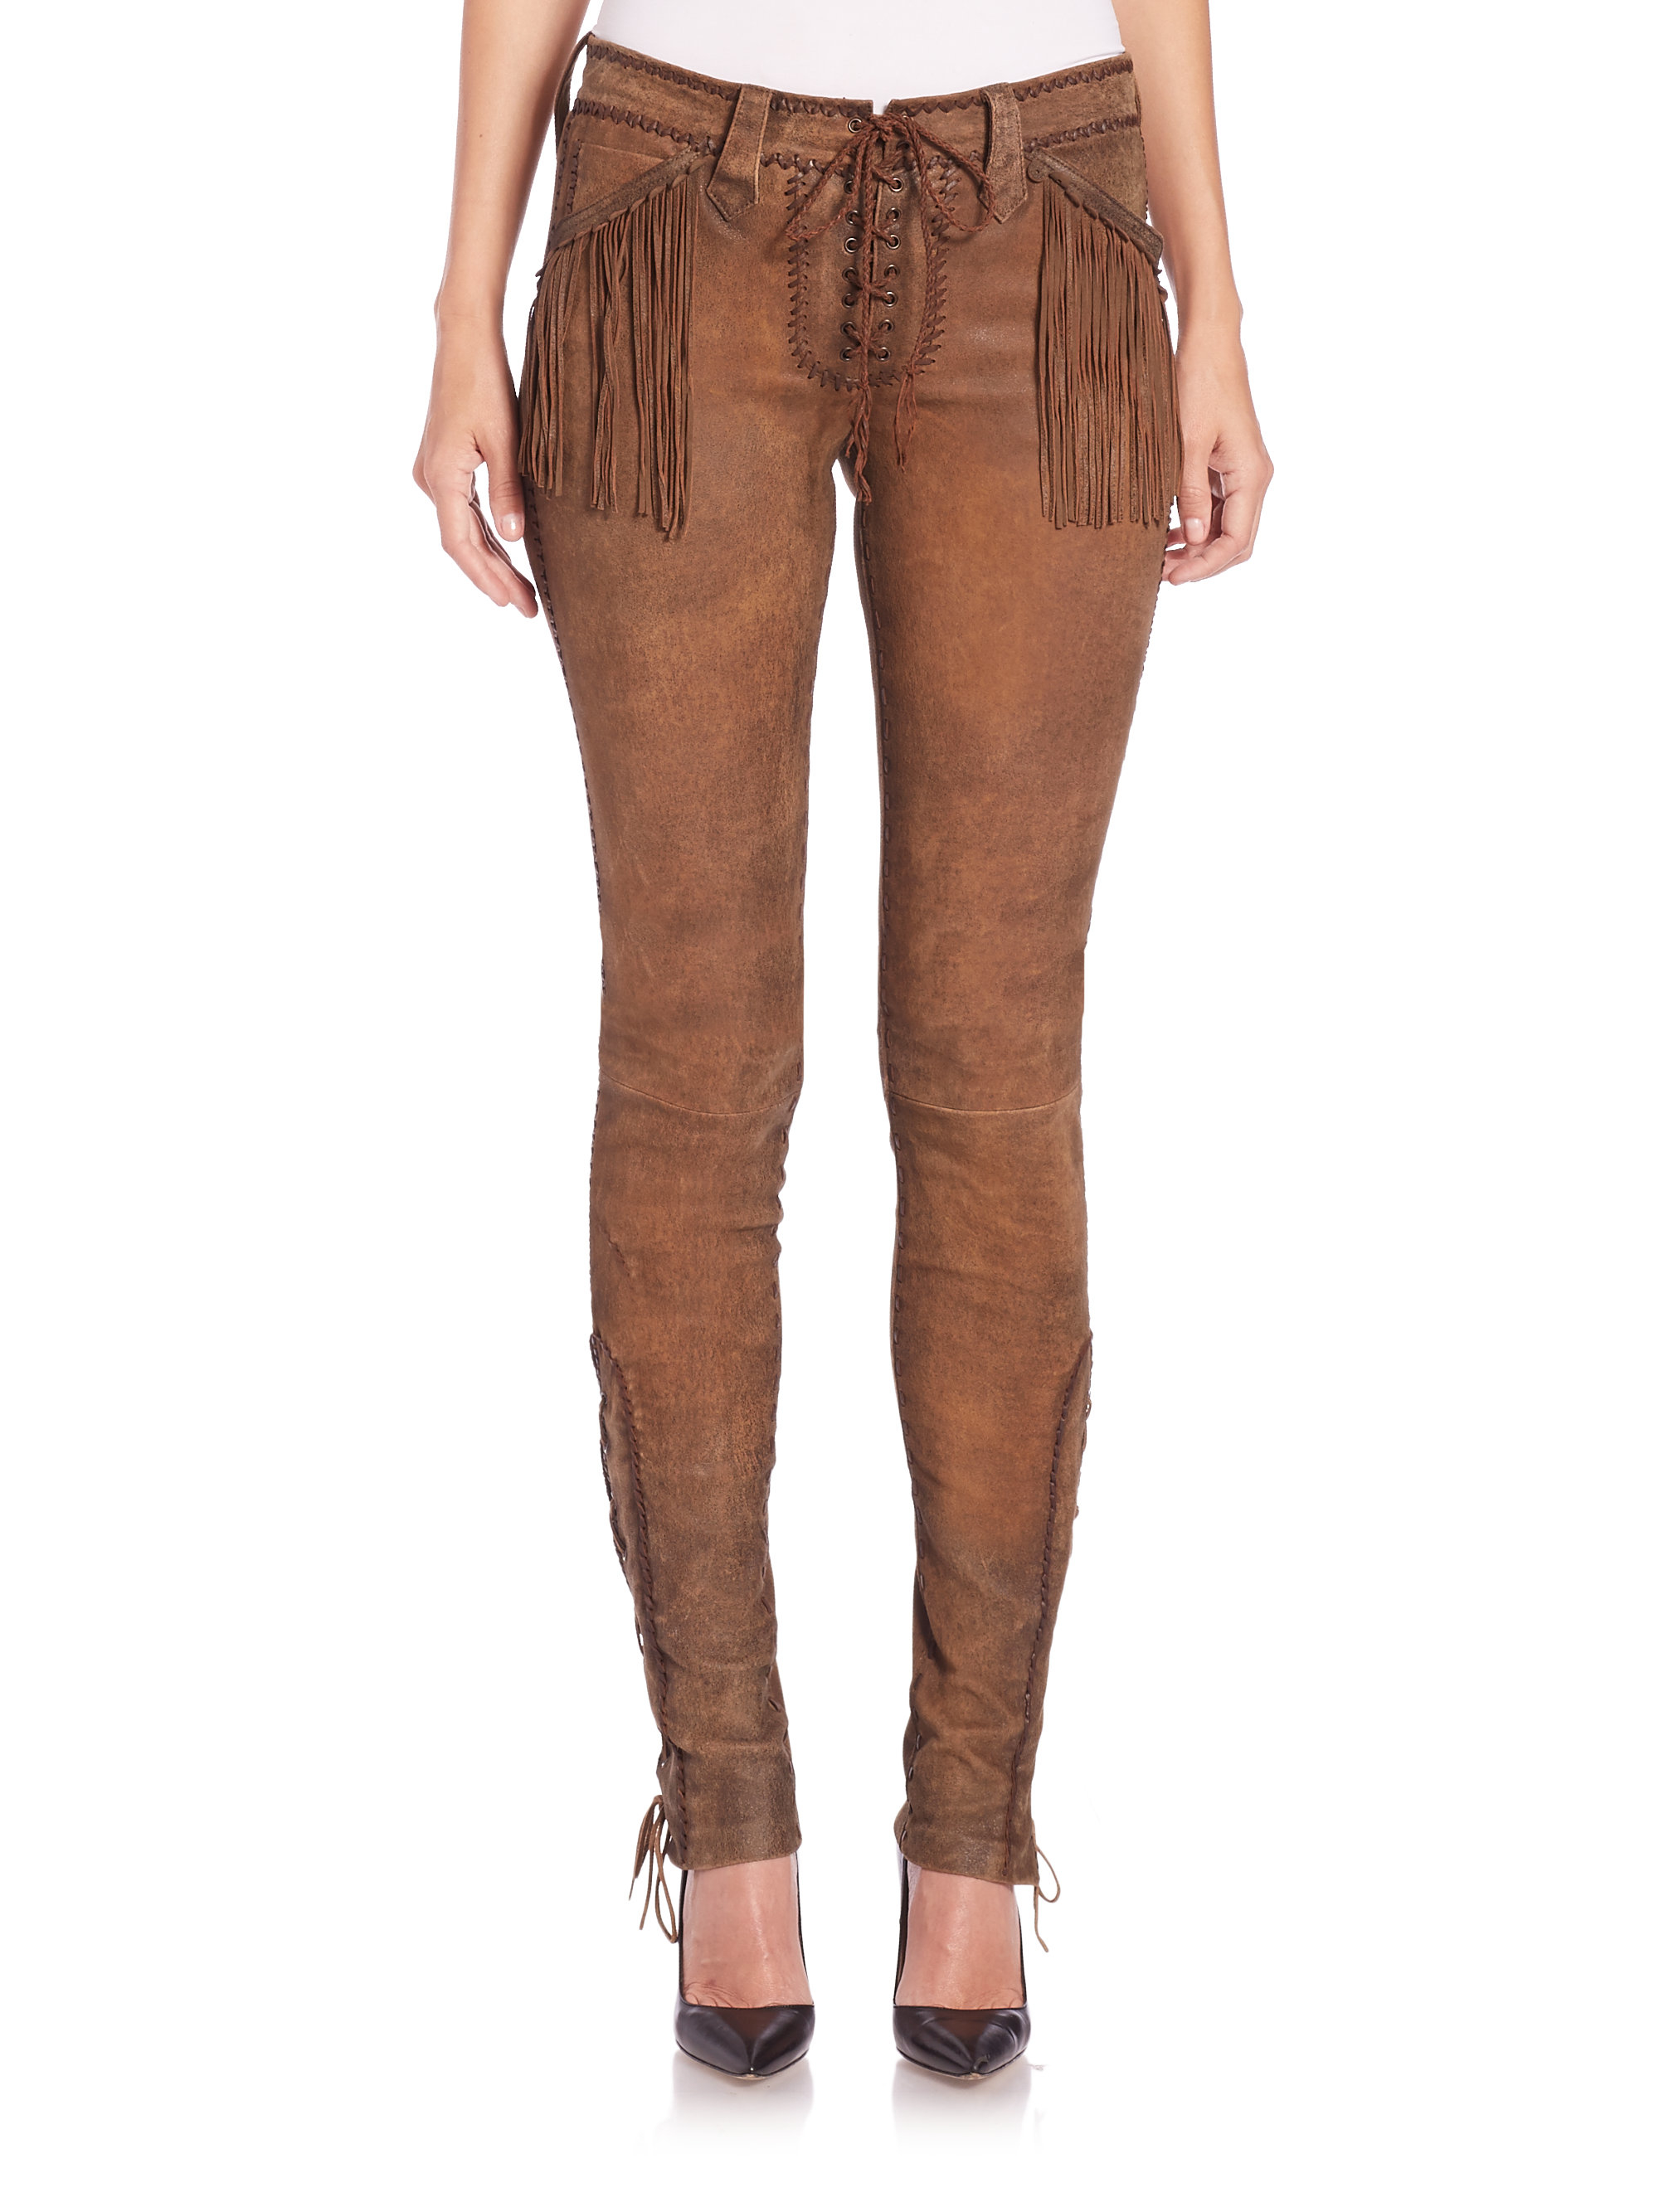 Lyst - Polo Ralph Lauren Fringed Stretch Leather Pants in Brown